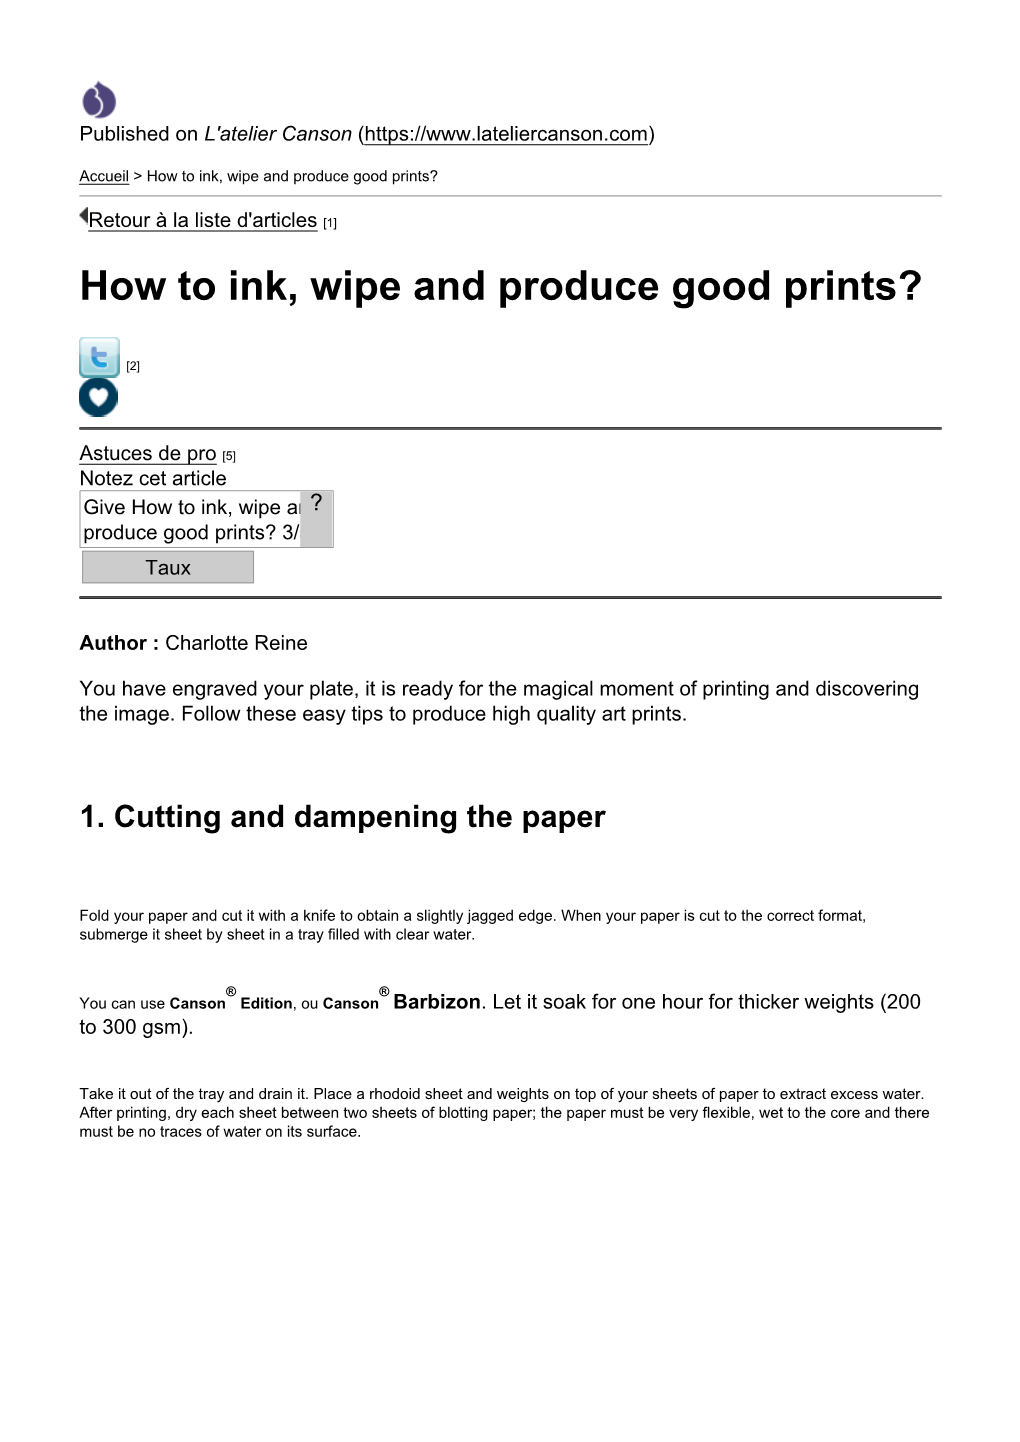 How to Ink, Wipe and Produce Good Prints?